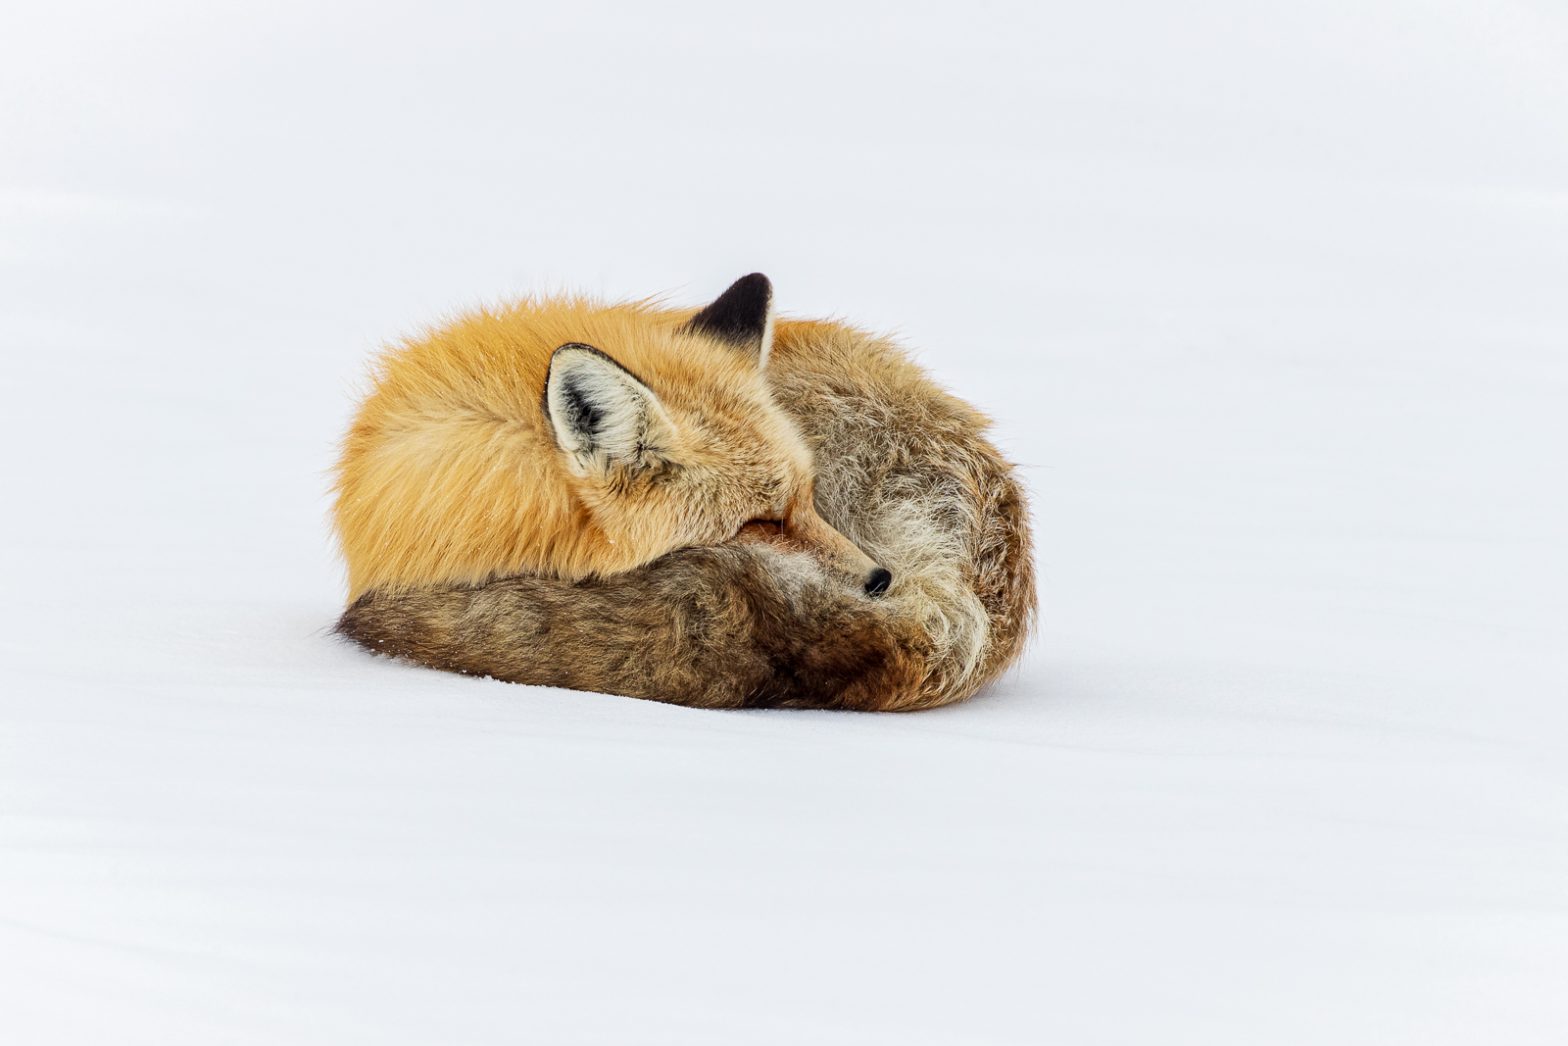 Wildlife photography of a Red Fox curled up and sleeping on snow